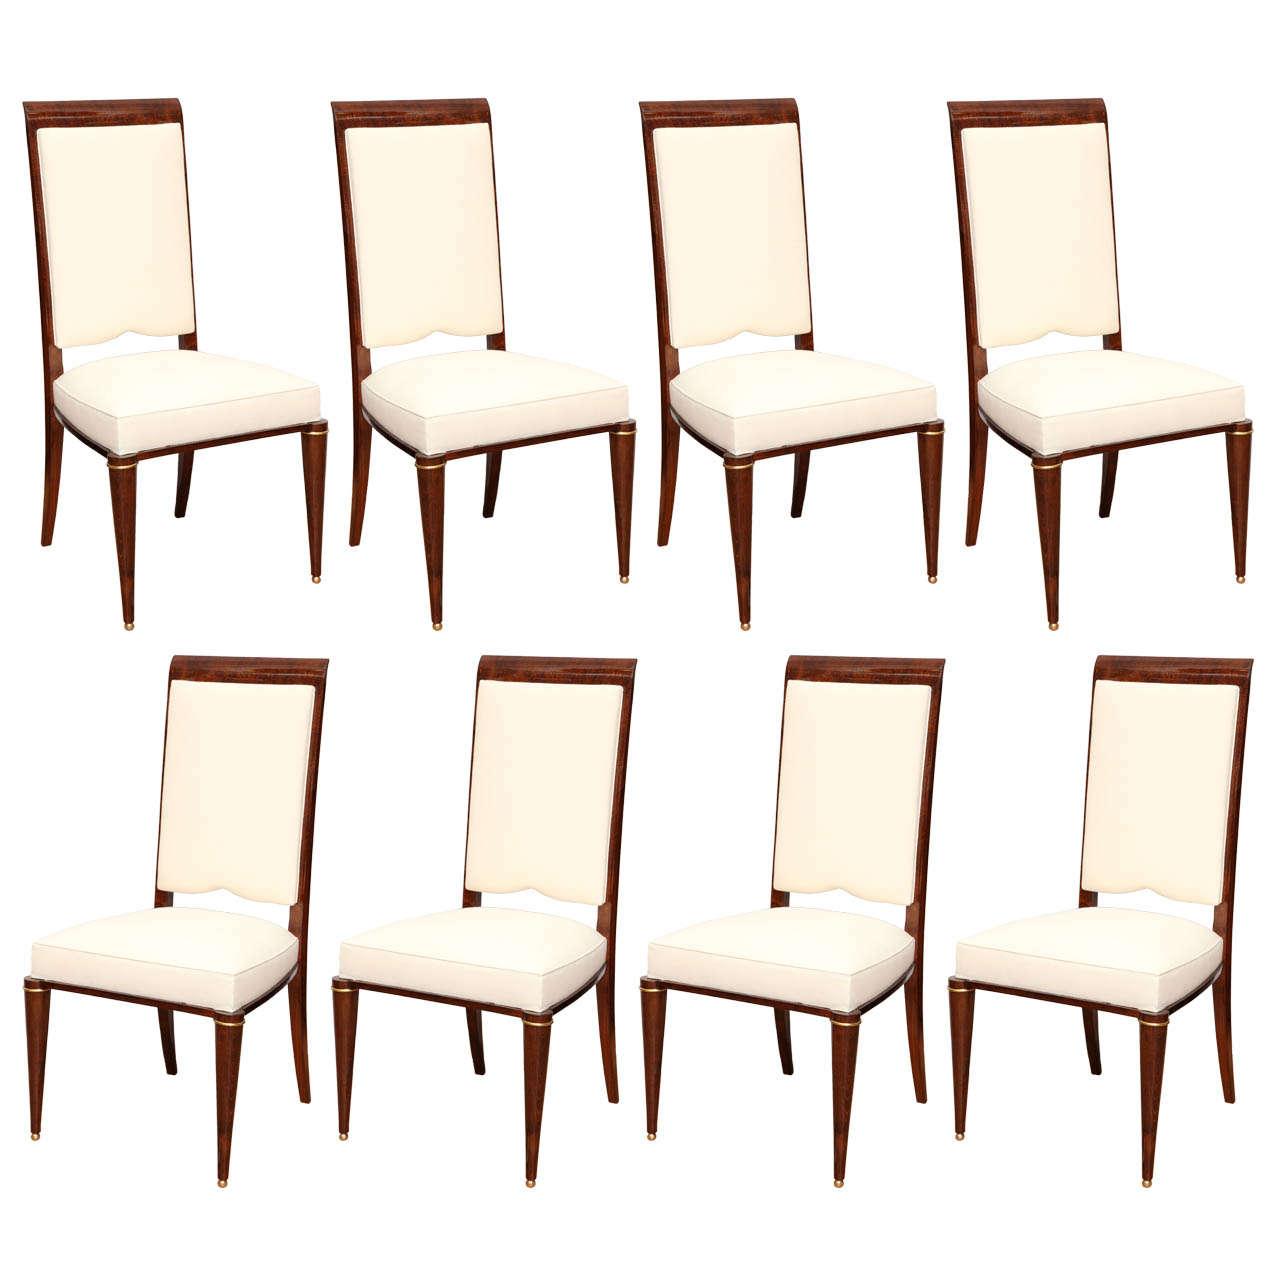 Suite of Eight French Art Deco Dining Chairs - 